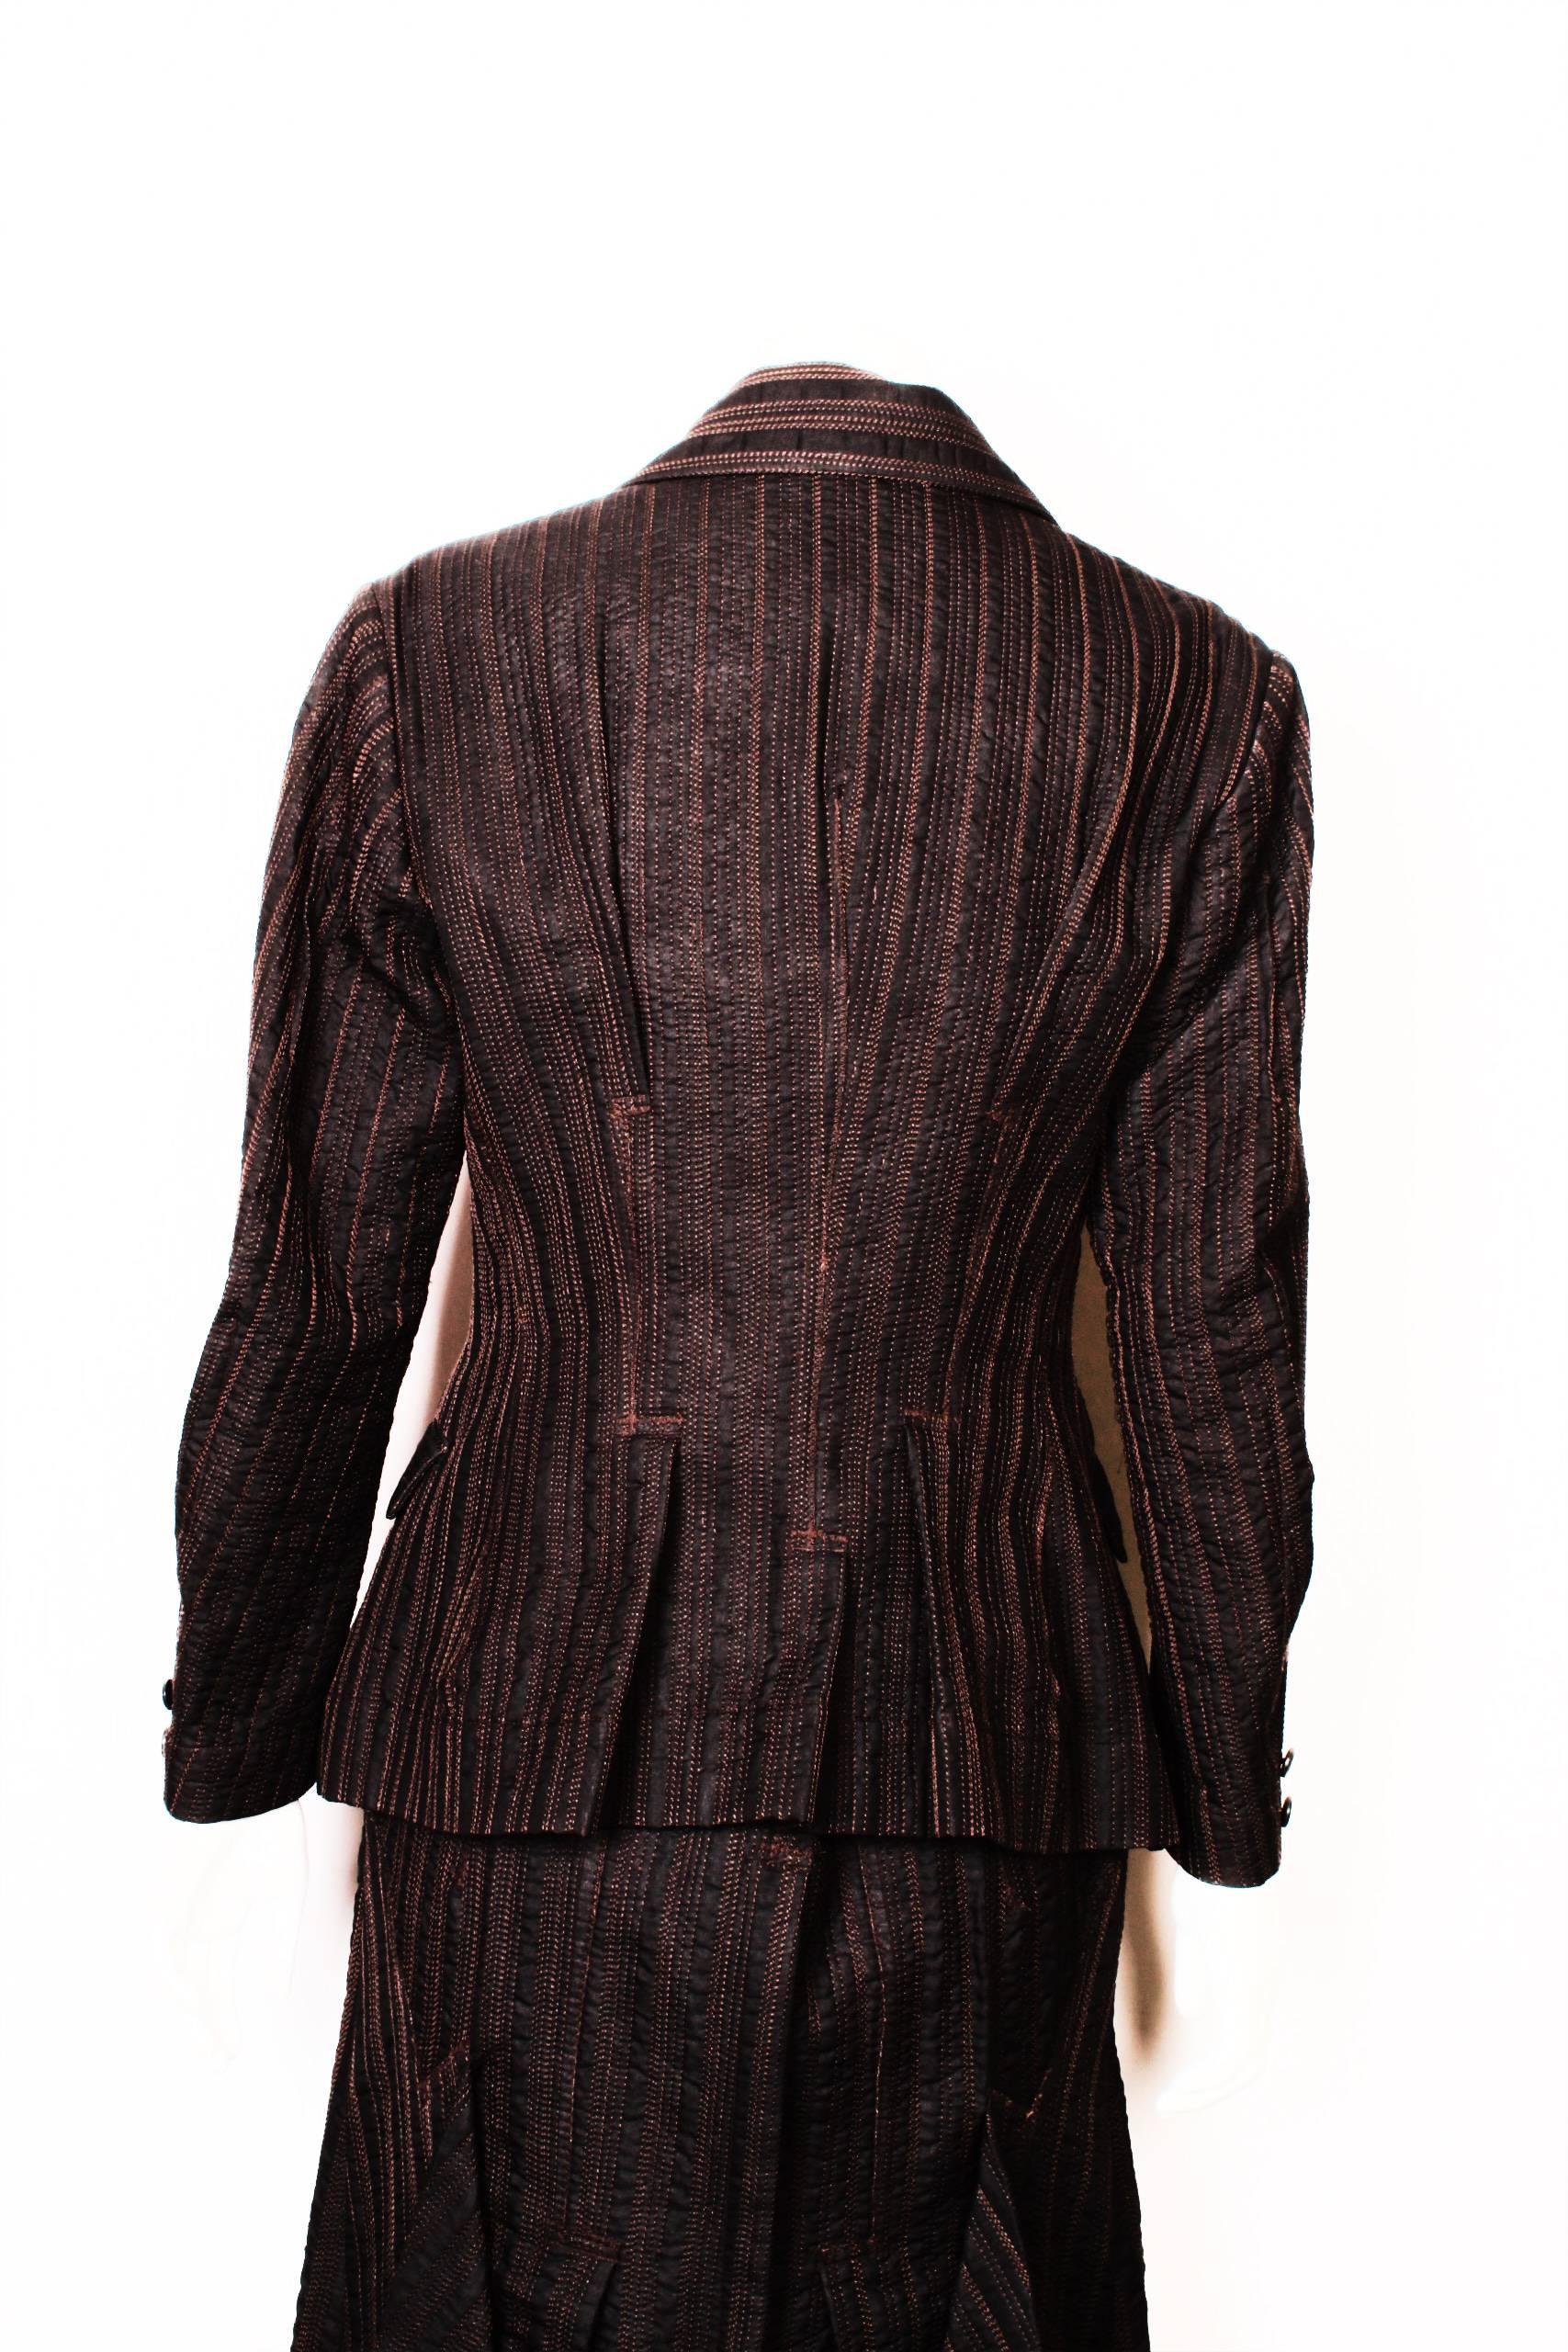 Issey Miyake Top Stitched Suit For Sale 2